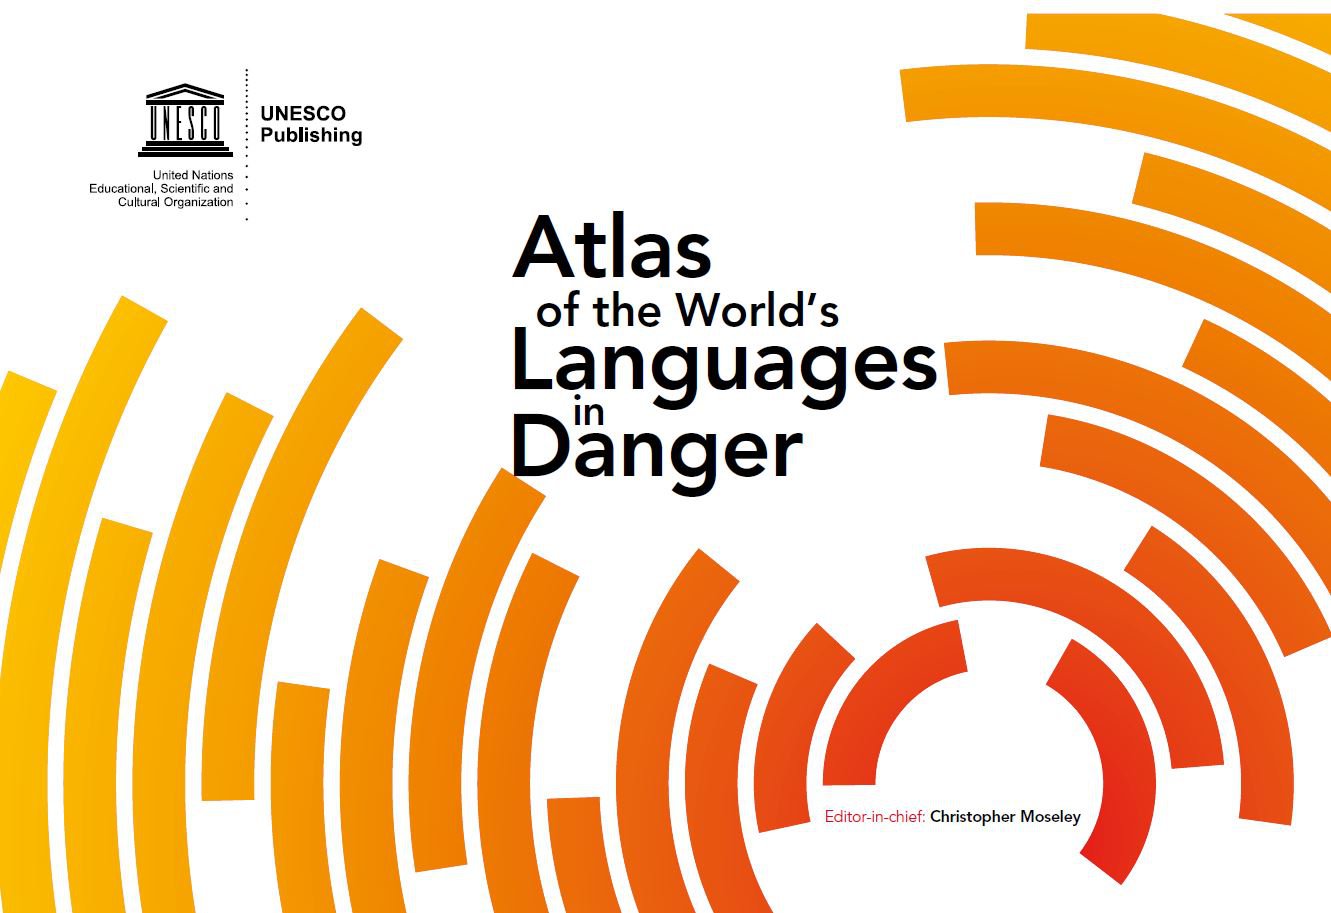 Atlas of the World’s Languages in Danger